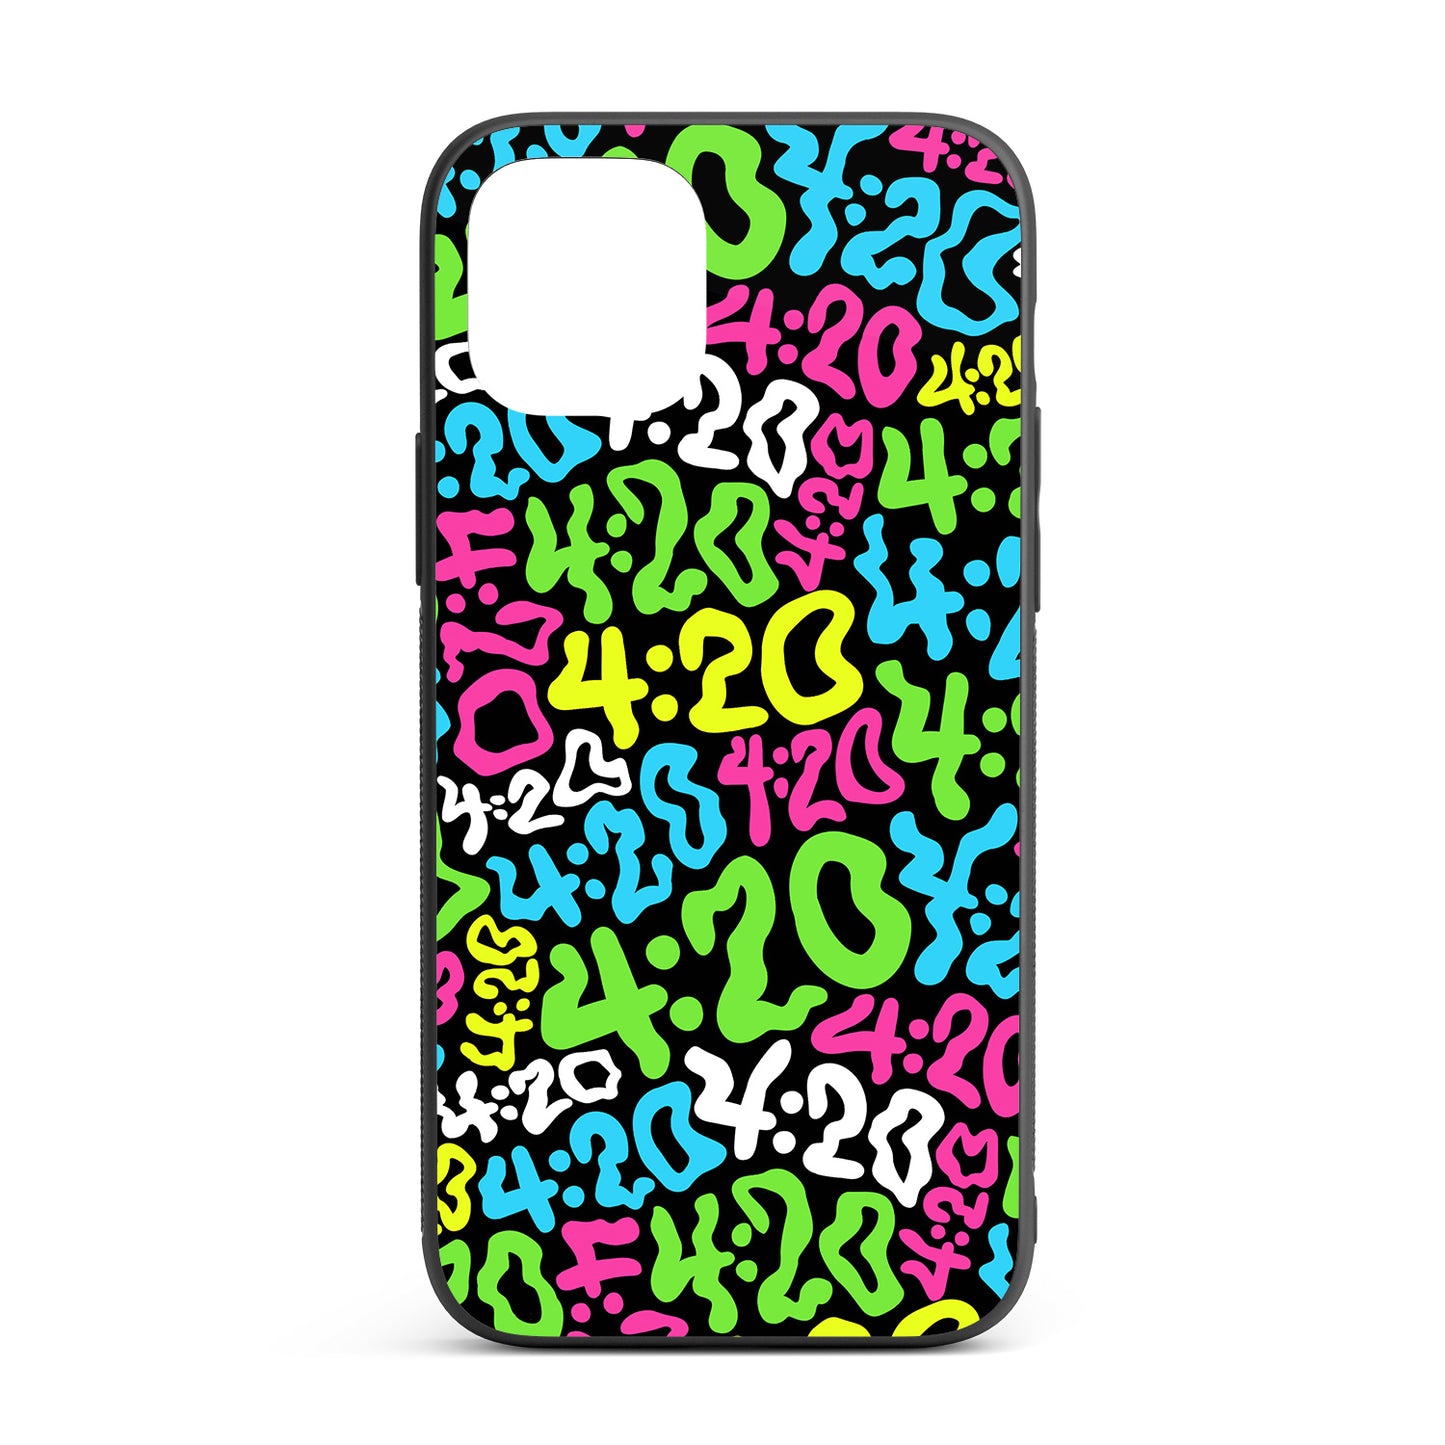 4:20 iPhone glass case